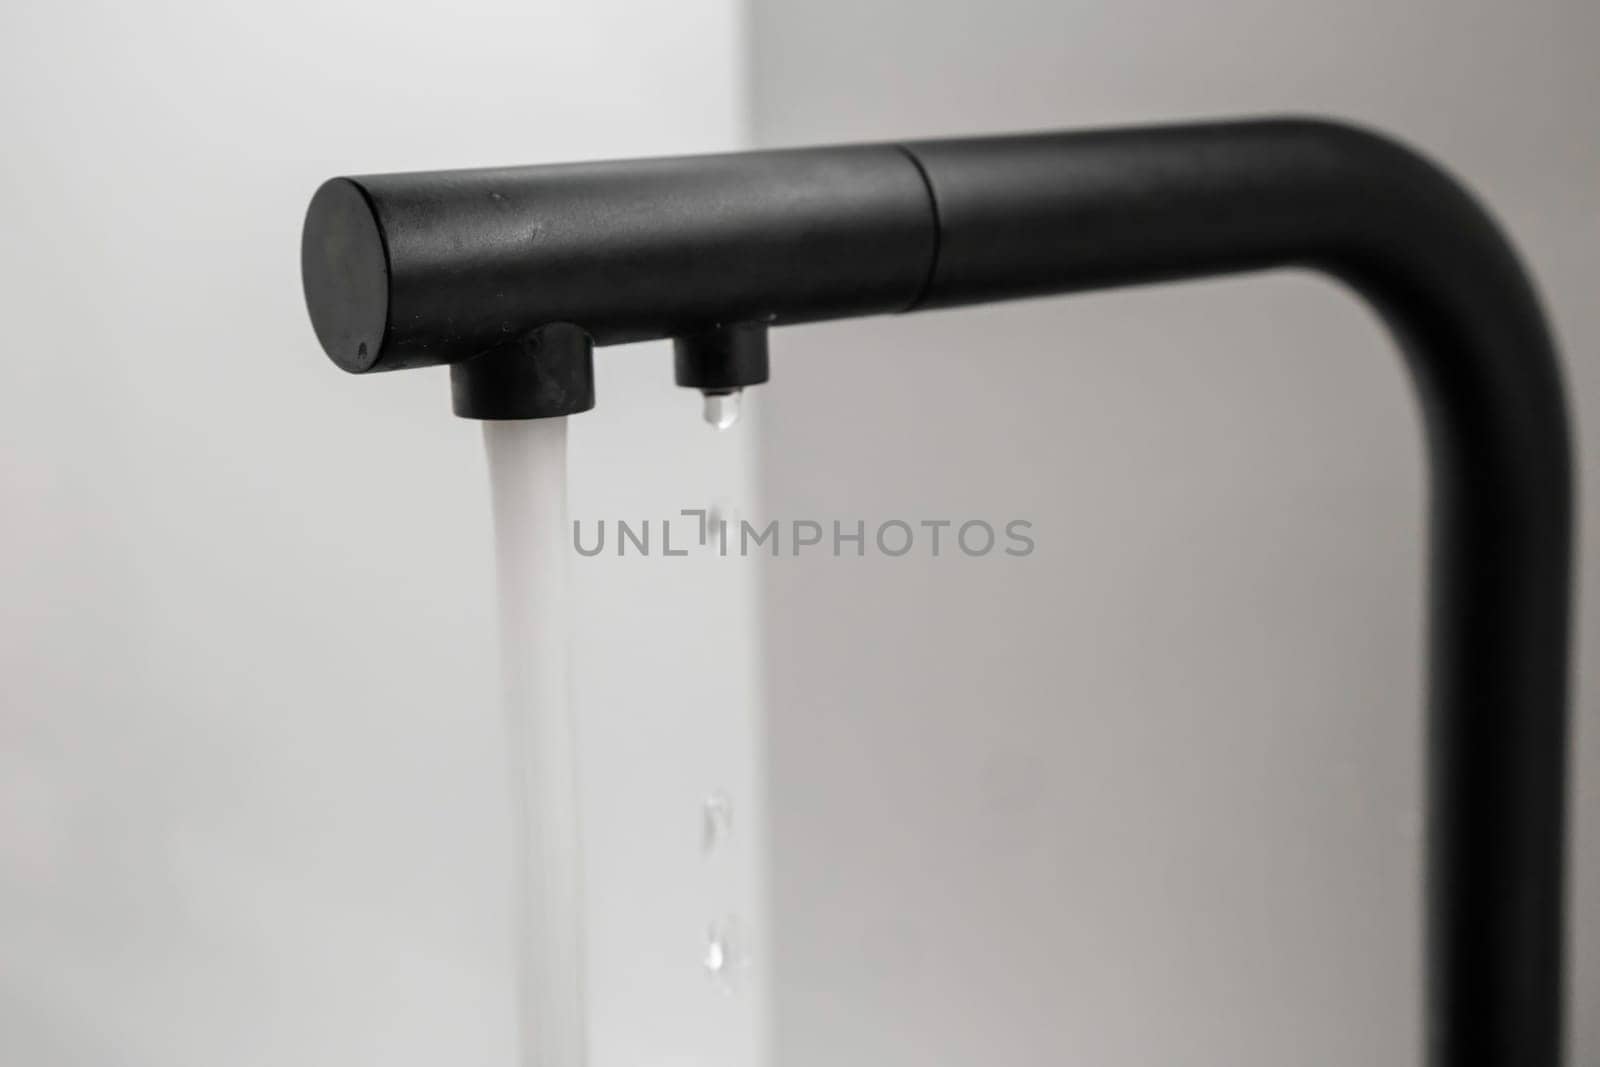 Water flows from the black tap in the kitchen.